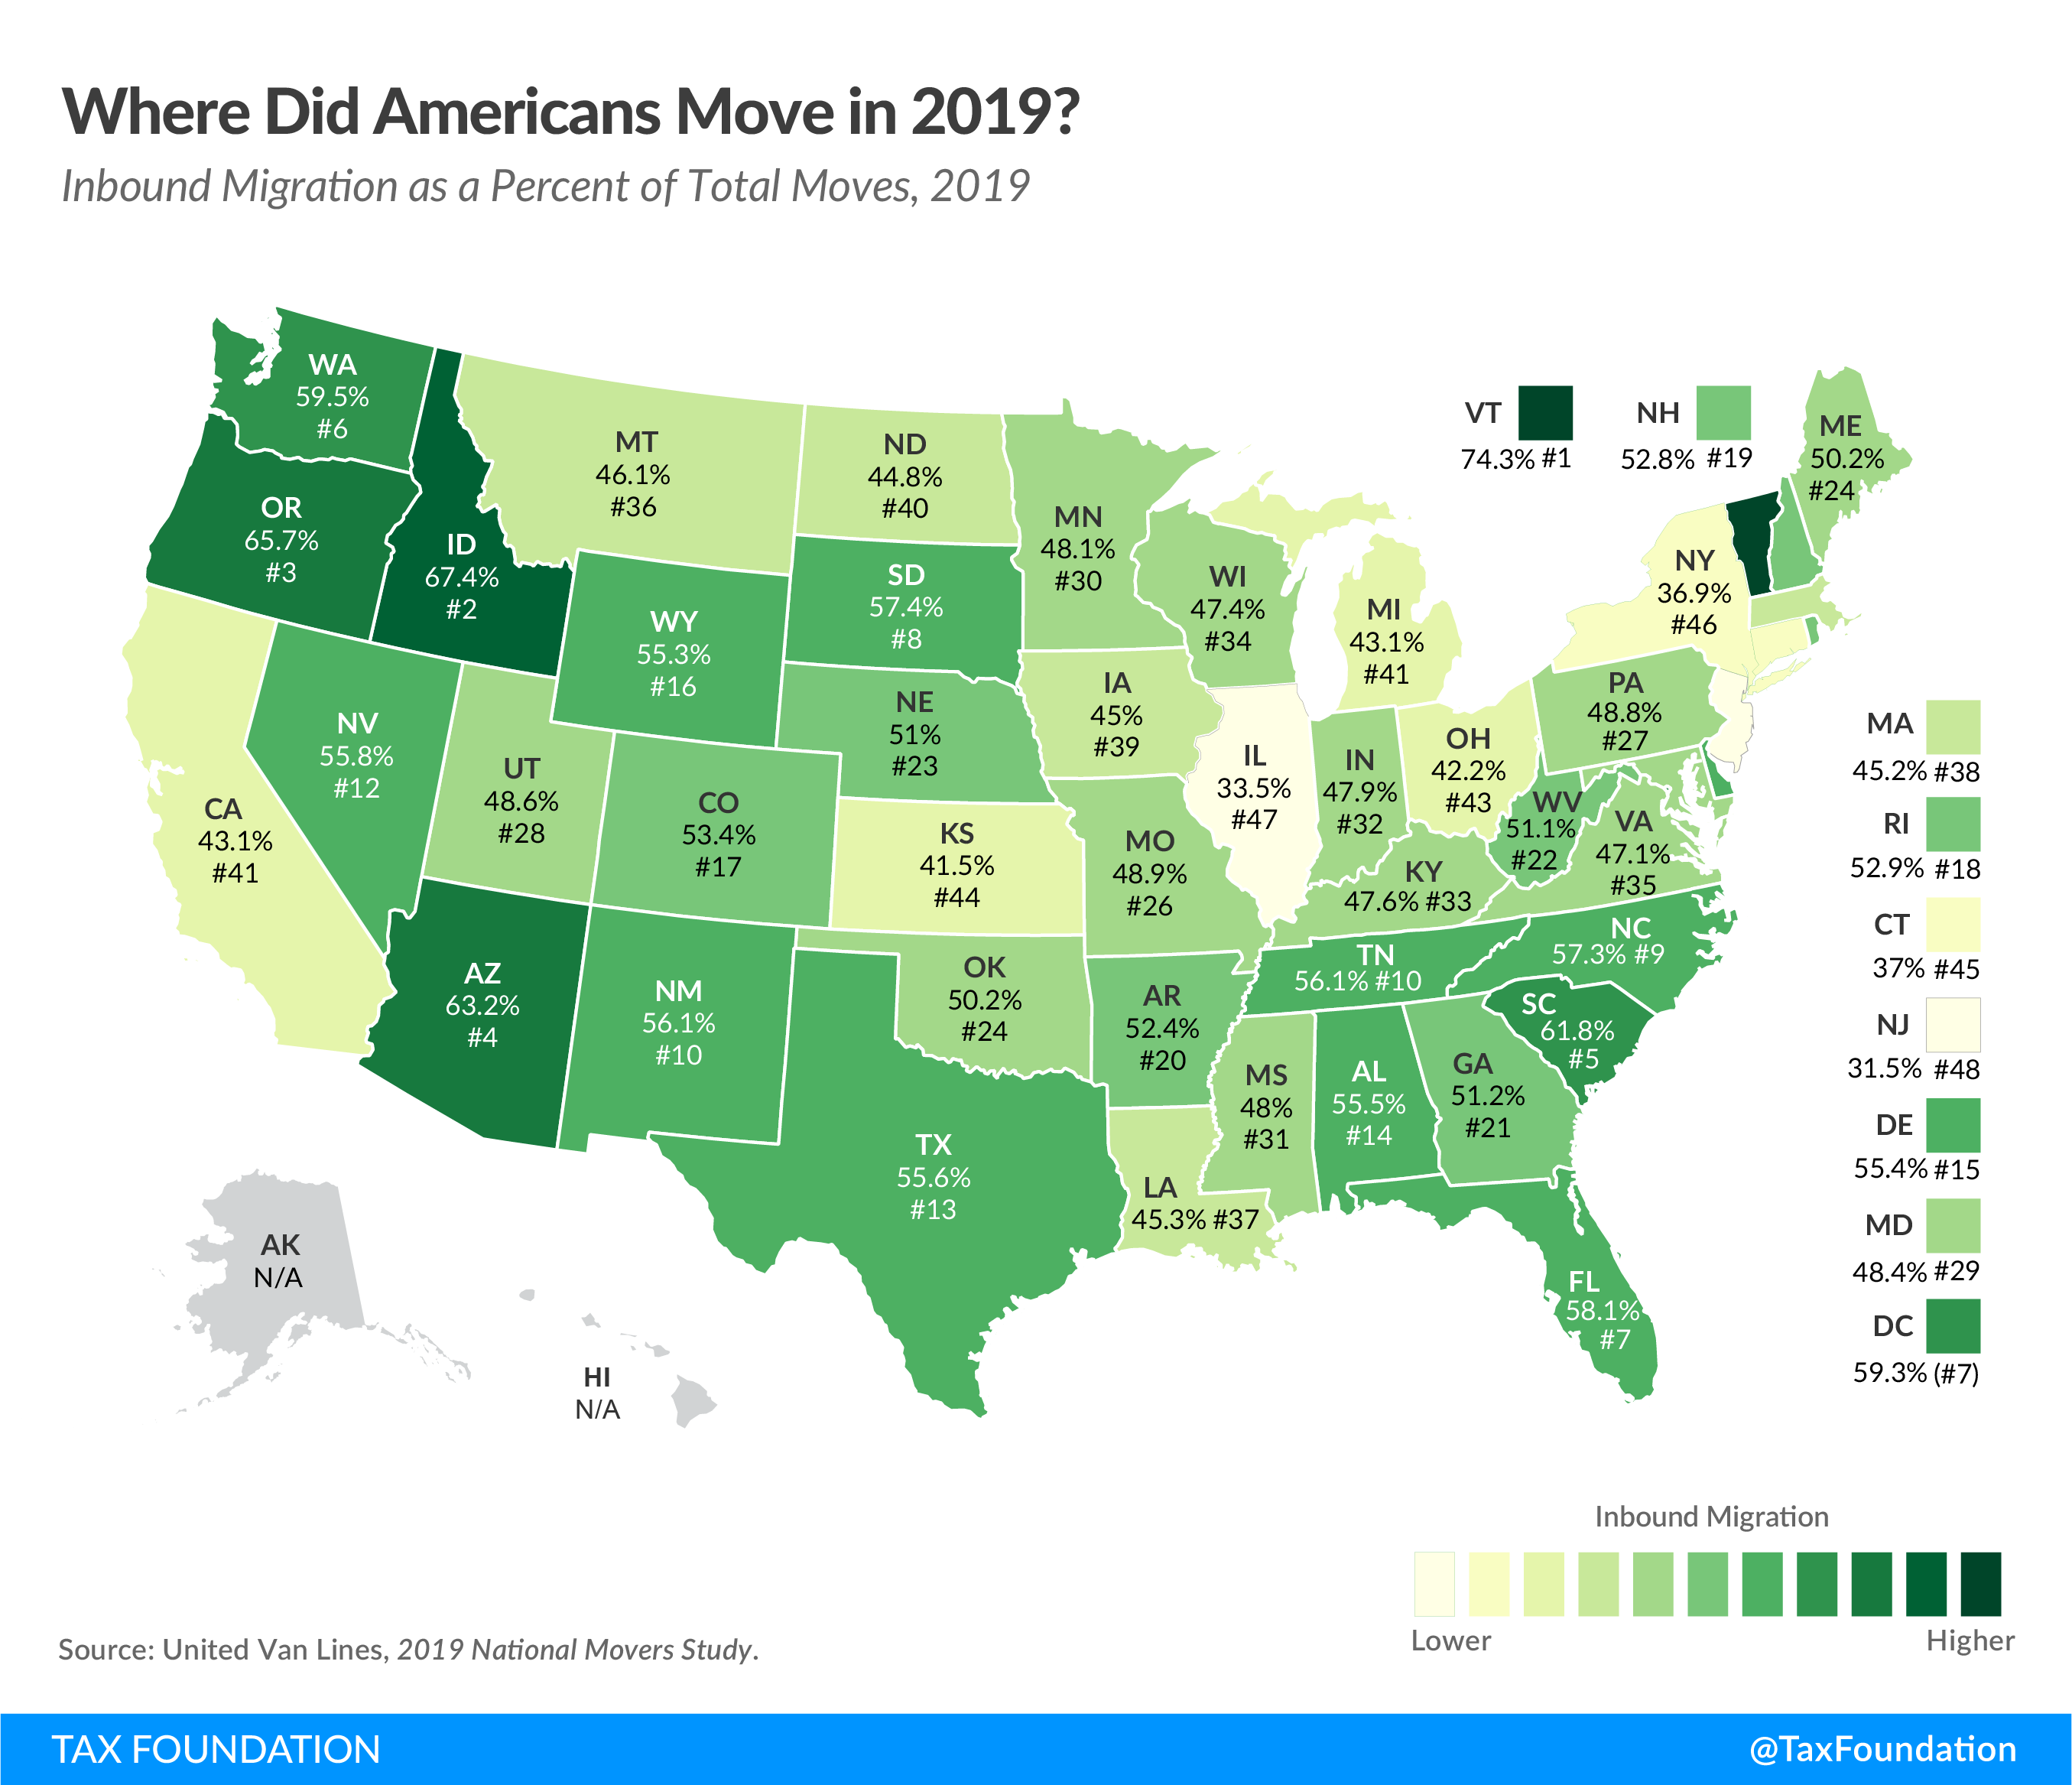 Where did Americans move in 2019? 2019 U.S.moving migration trends, U.S. state migration